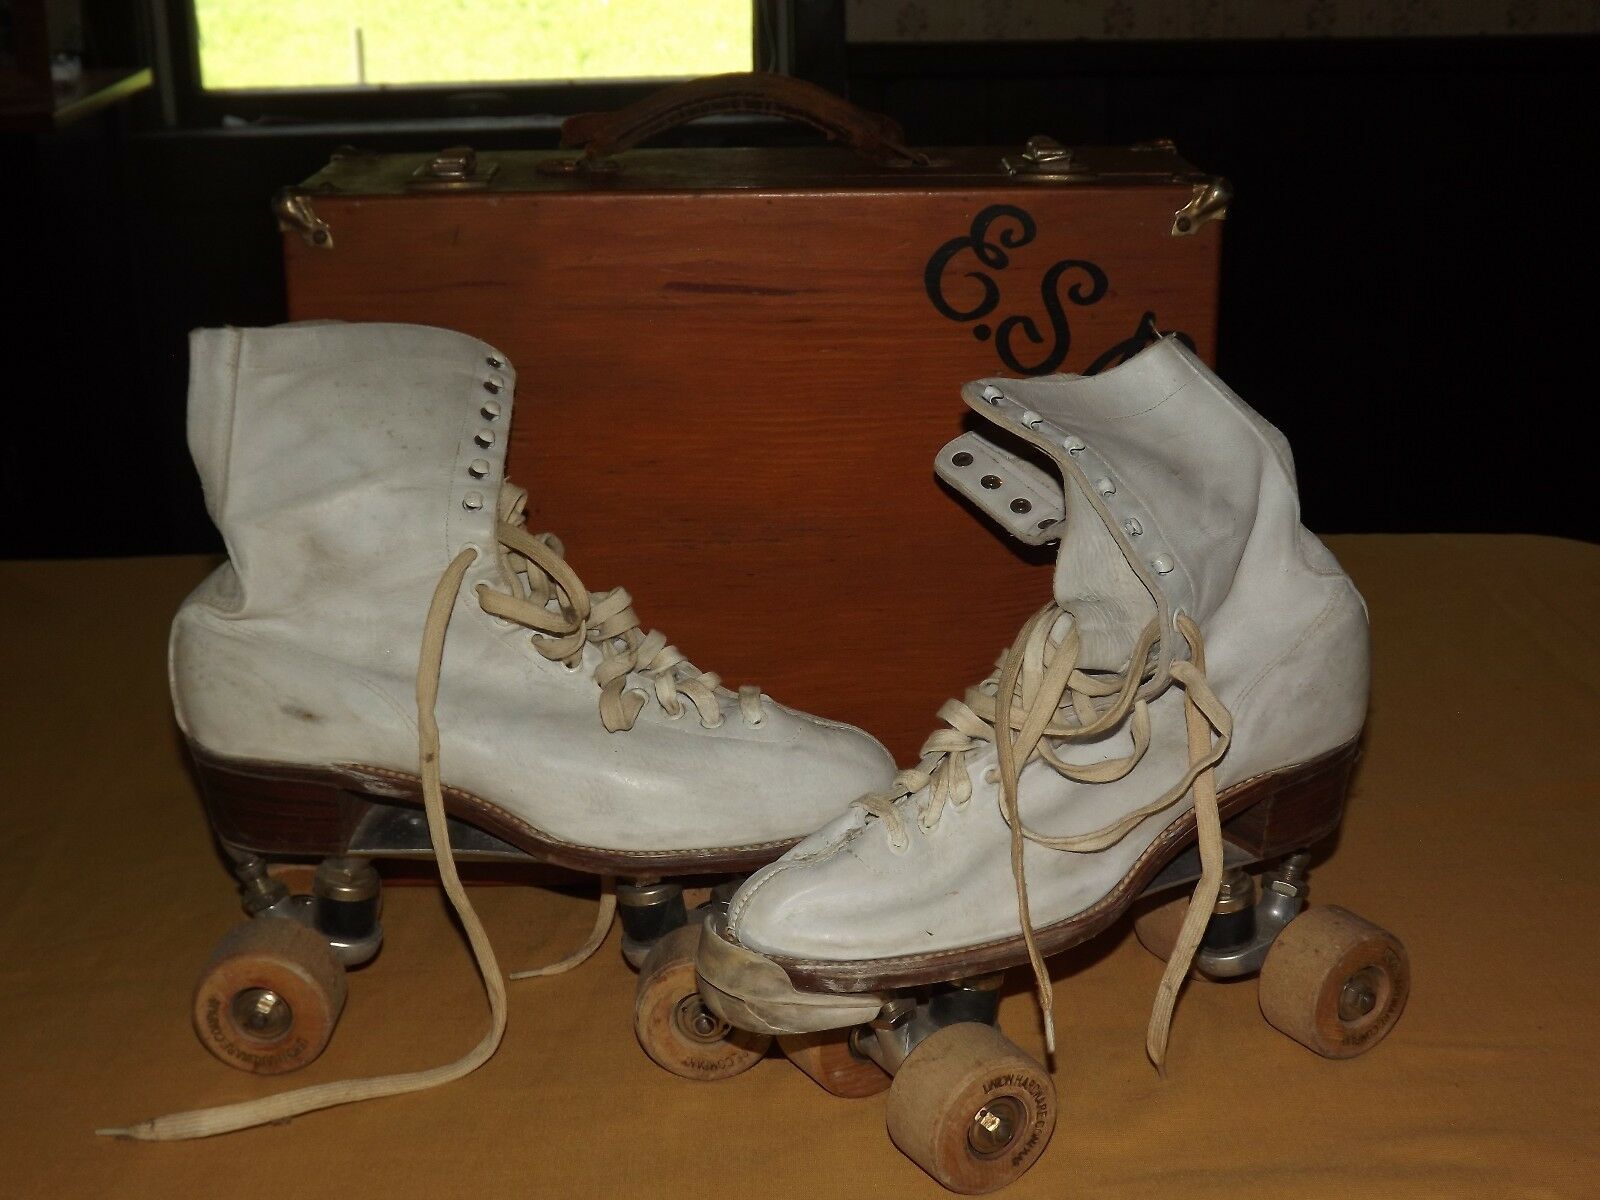 Vintage Union Hardware Size 8 1/2 White Boot Roller Skates In Wood Box